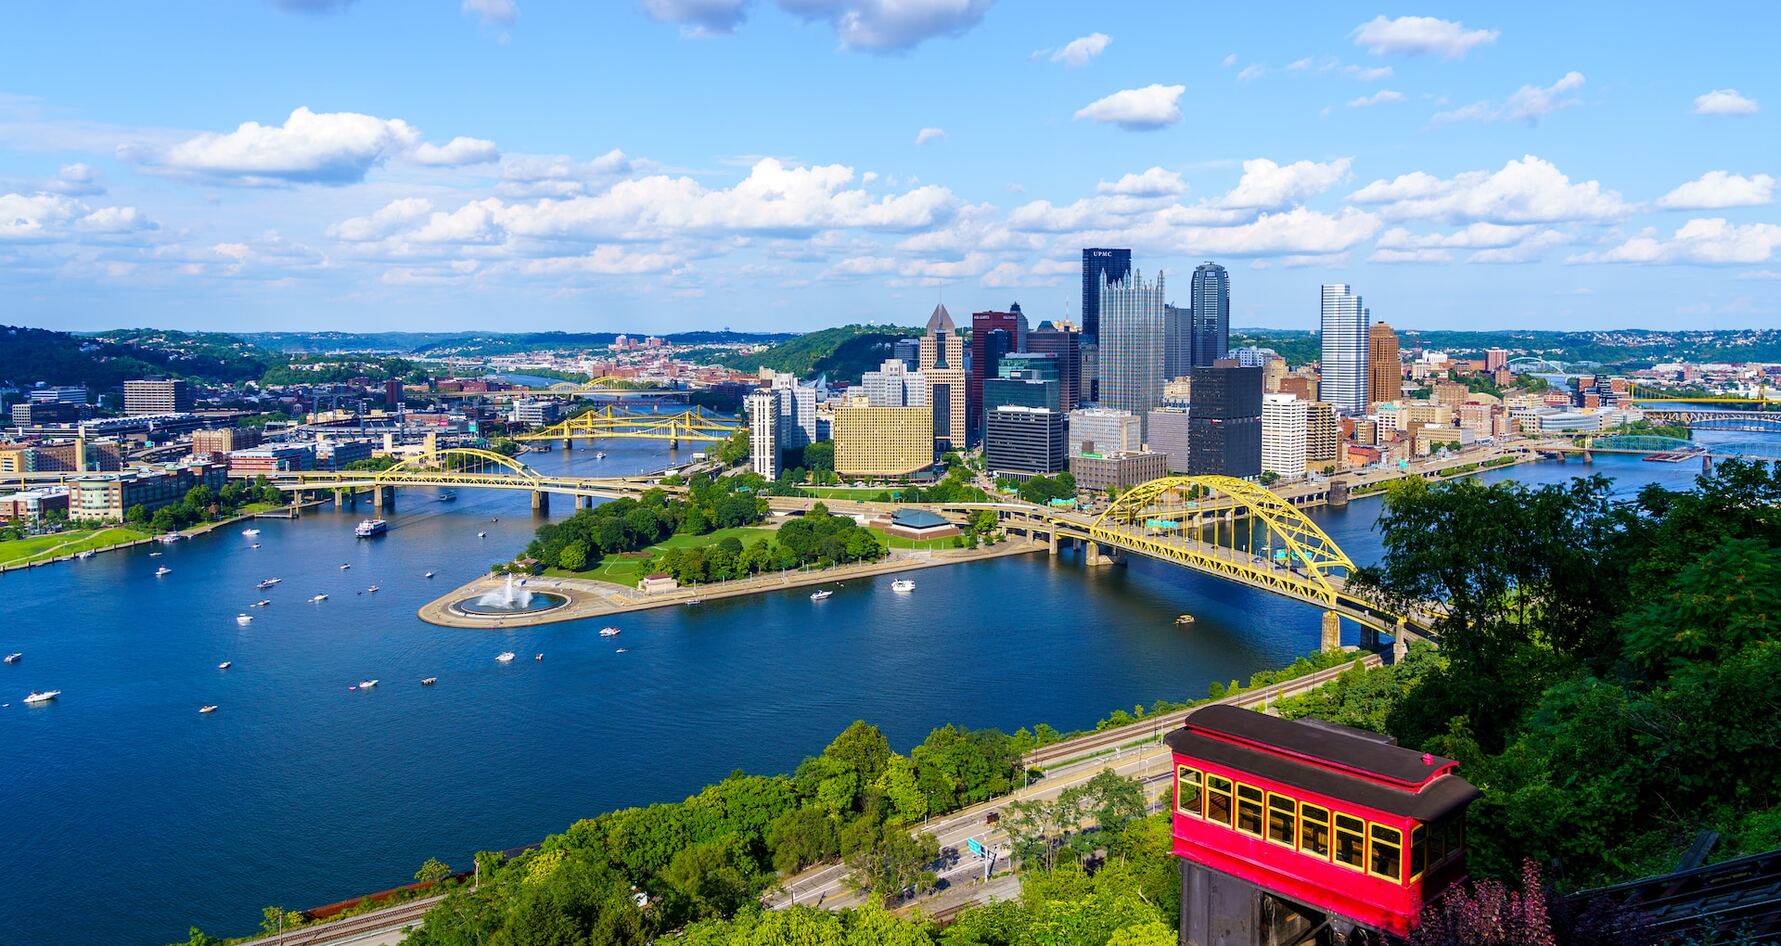 Move Over, Los Angeles and NYC: These 3 City Council Votes Could Make Pittsburgh the New Vegan Capital&nbsp;